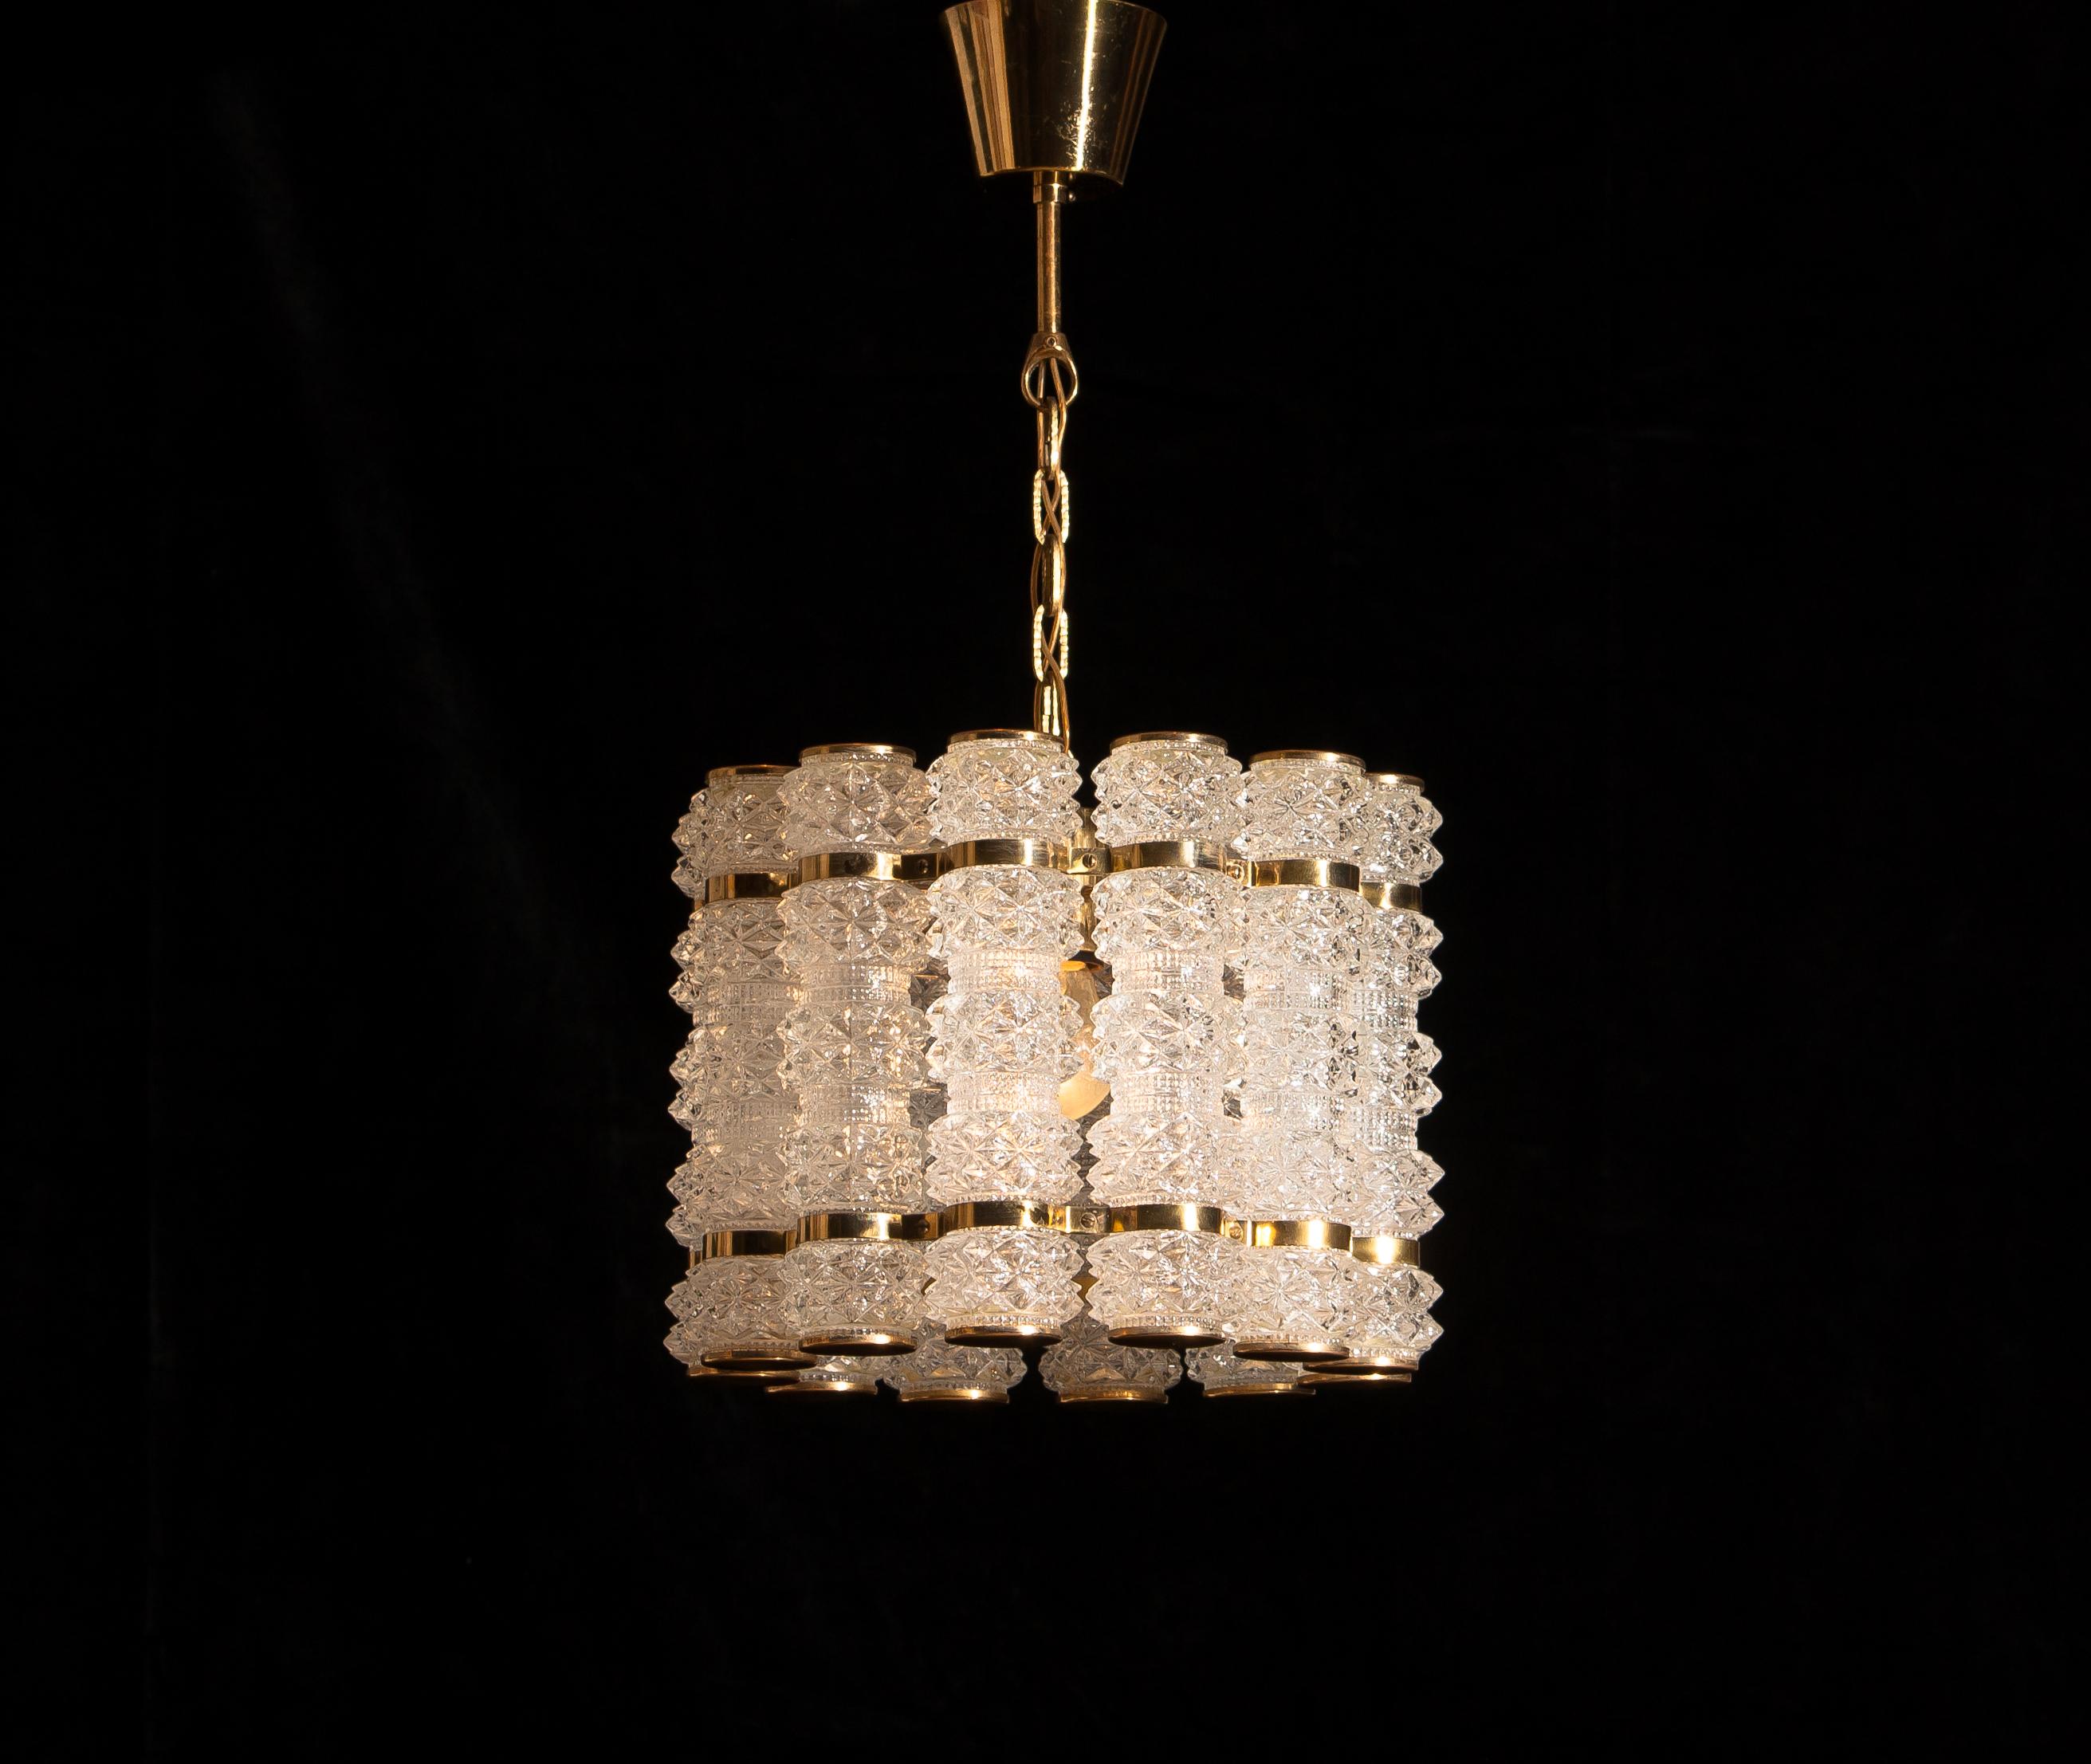 Beautiful and in perfect condition brass chandelier or pendant with twelve crystal cylinders.
Designed and manufactured in by Tyringe Konsthantverk, Sweden.
All crystal cylinders are made by Orrefors, Sweden.
Wired for 220 and 110 volt. Bulb